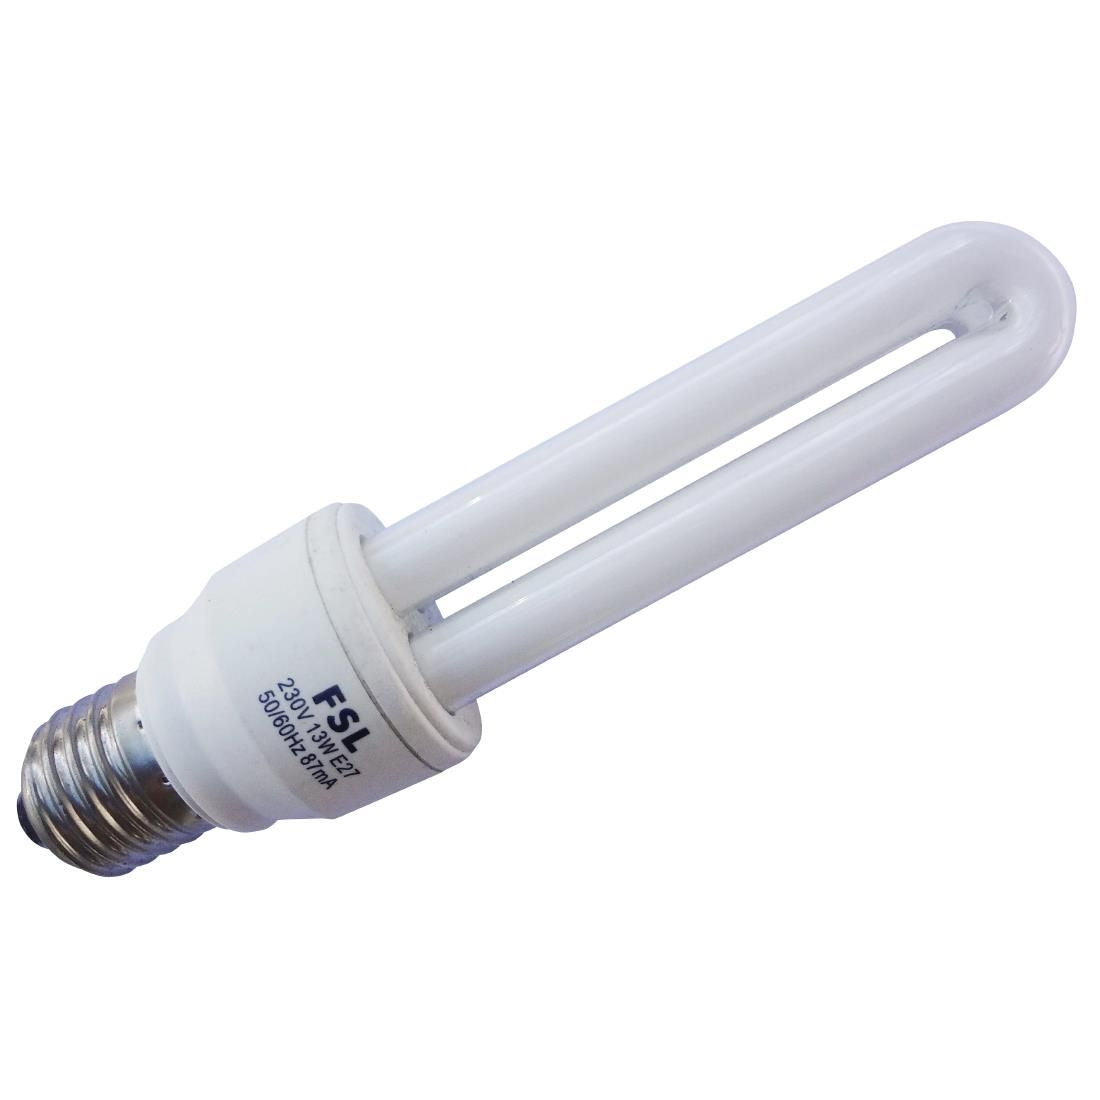 Eazyzap Replacement Fly Killer Bulb JD Catering Equipment Solutions Ltd